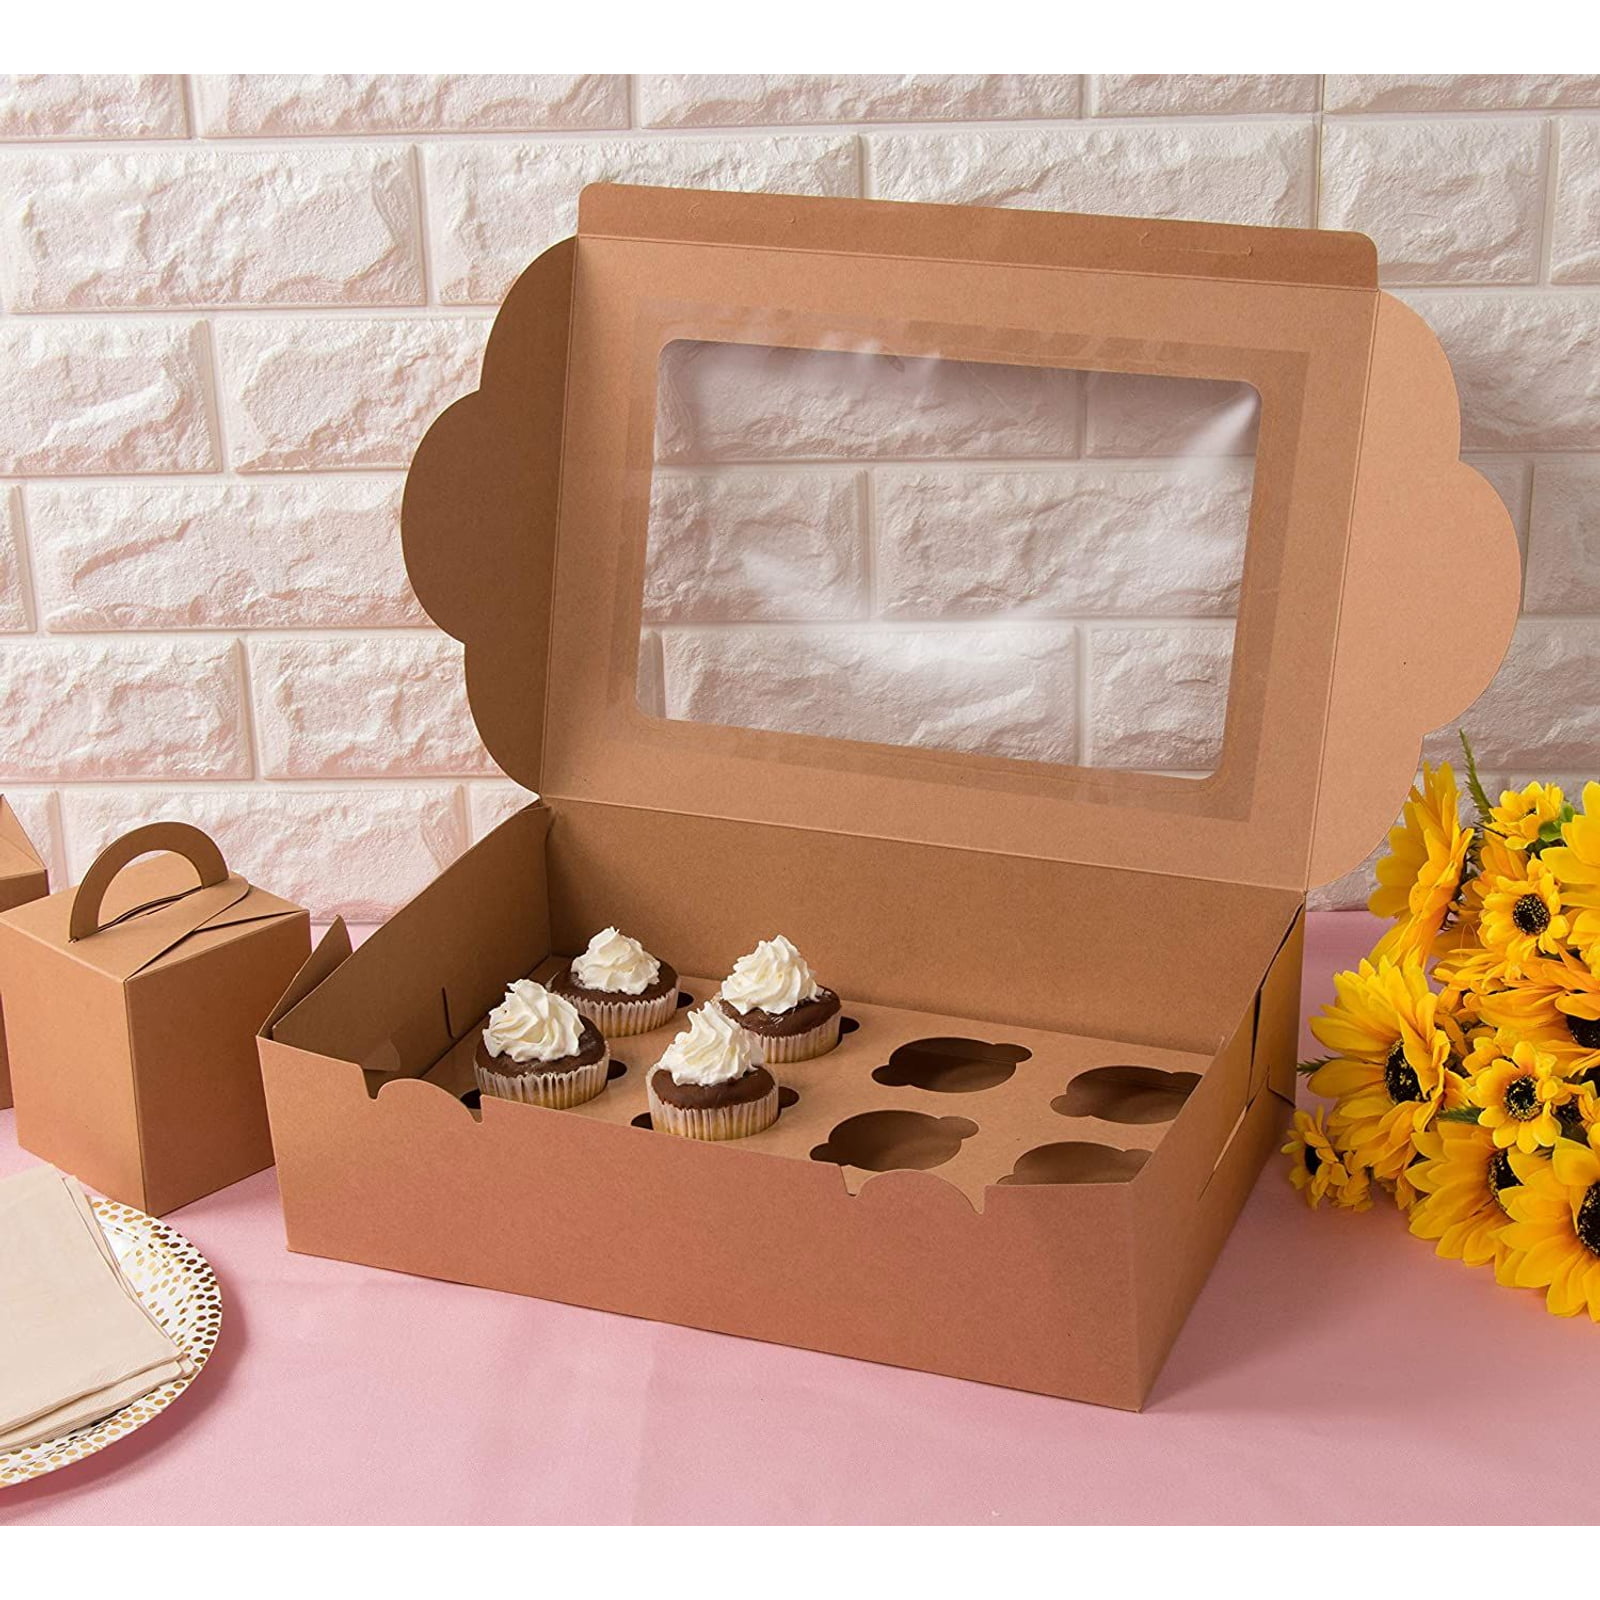 Winko Treat Boxes 12 Trays and 45 Stickers Included 4 Colors Decorative Kraft Gift Box Set of 12 Bakery Cake Cupcake Cookies Chocolate Box 